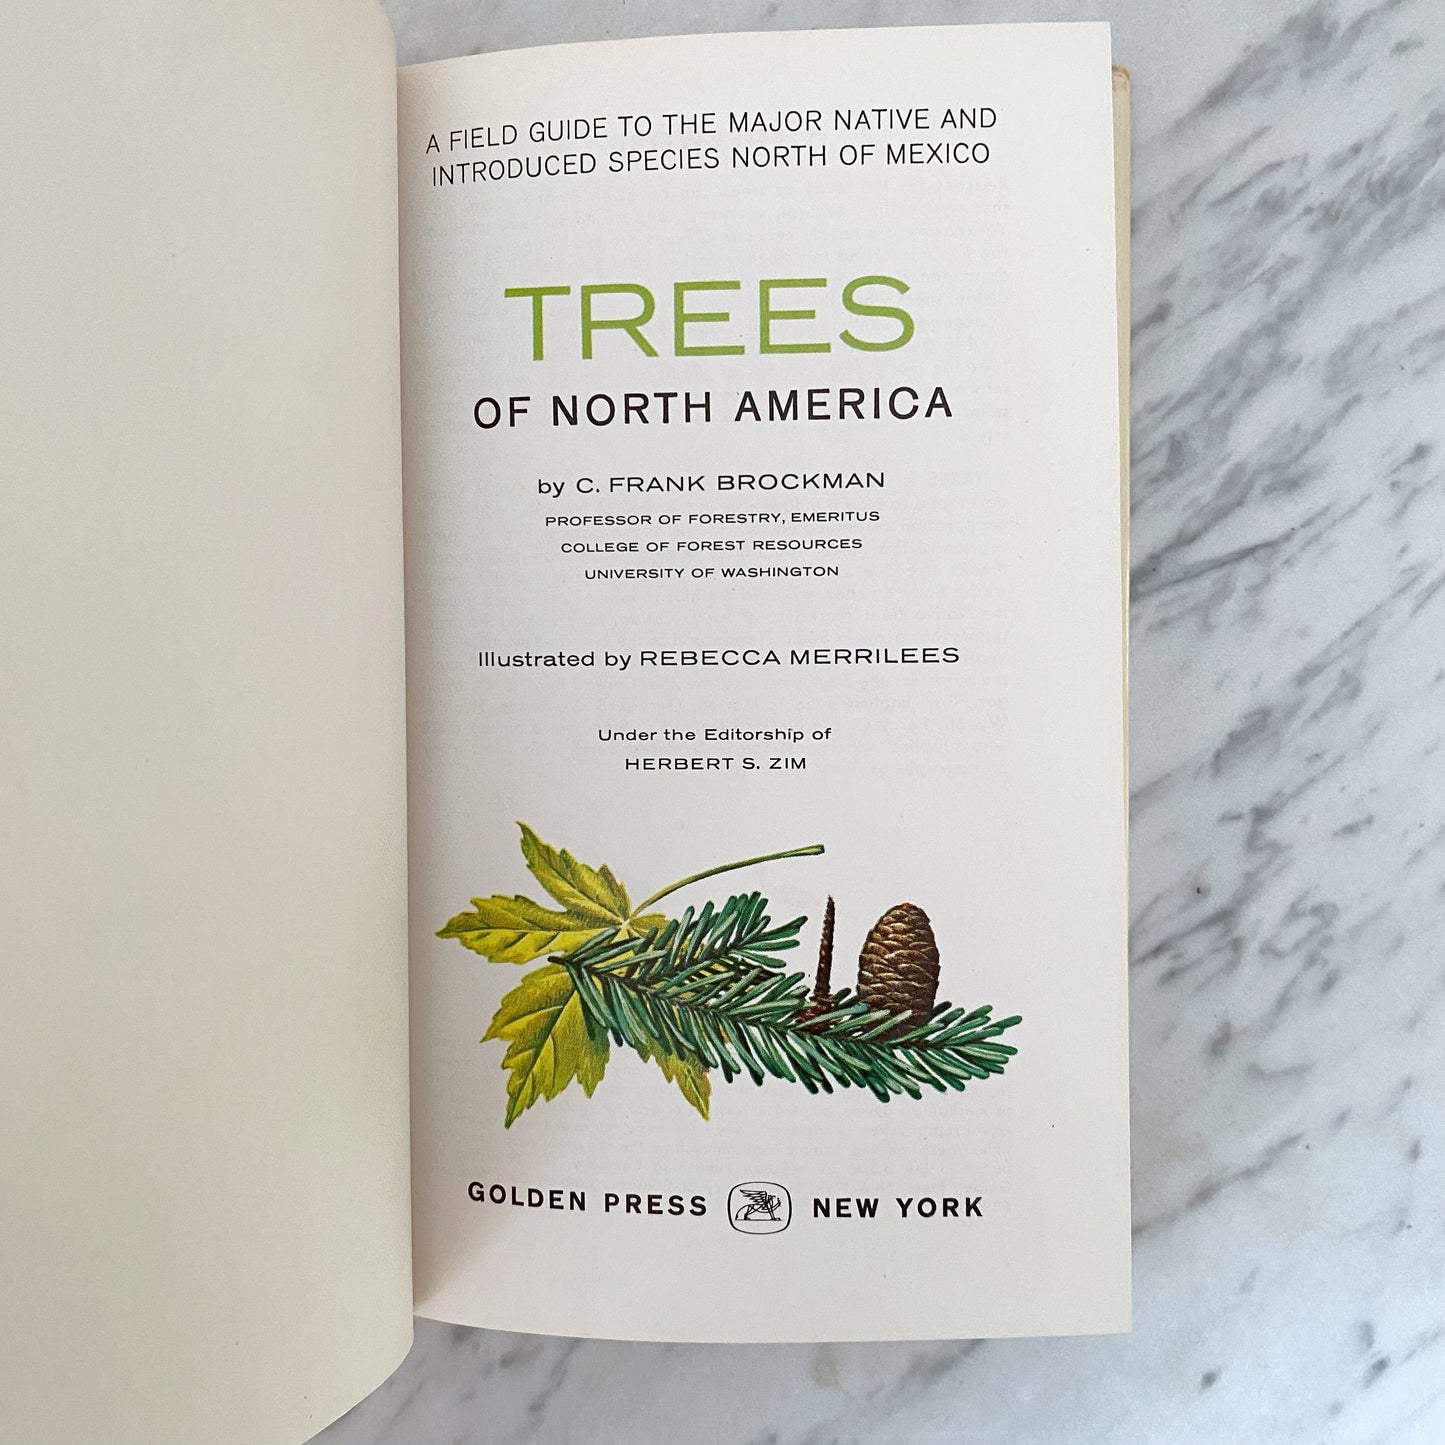 Book: Trees of North America (1968)